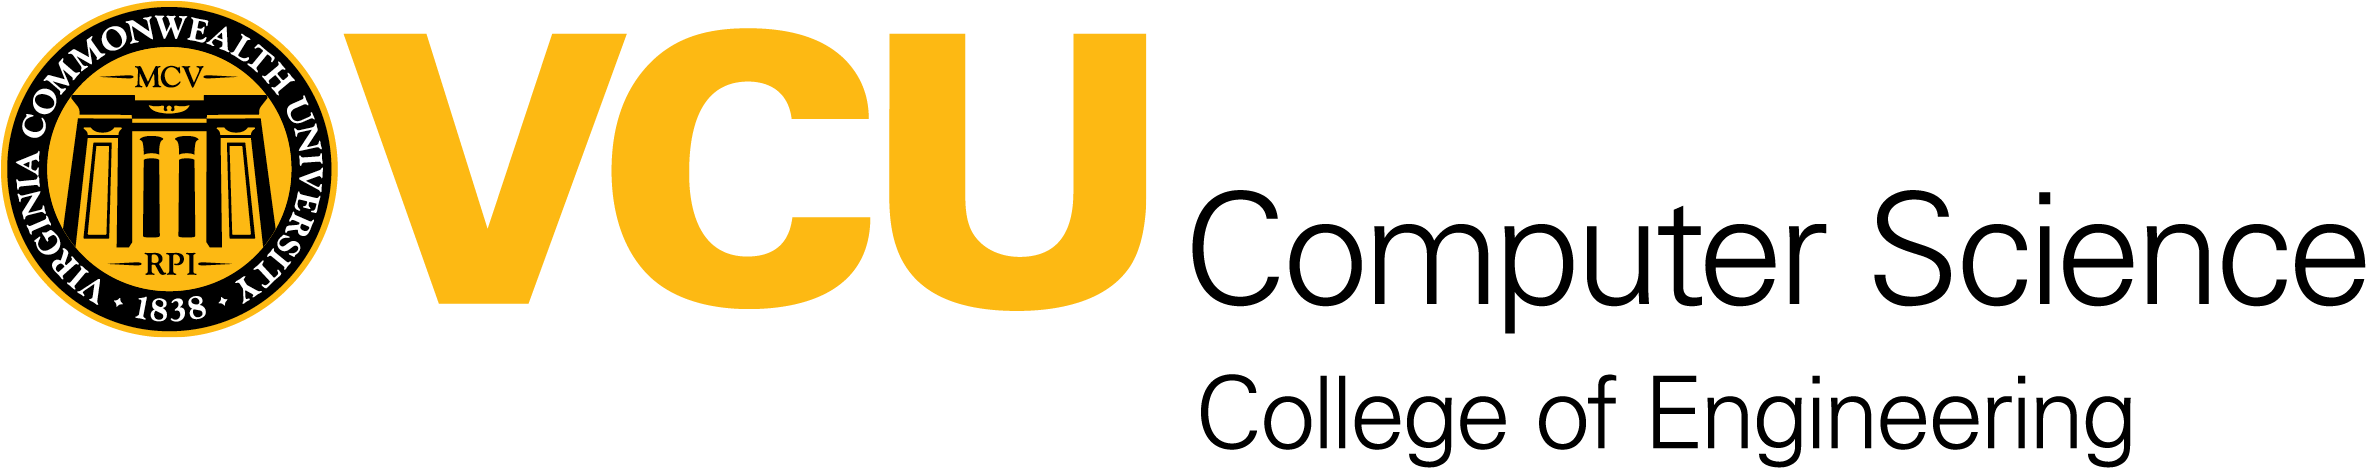 Brandmark for the Department of Computer Science in the VCU College of Engineering